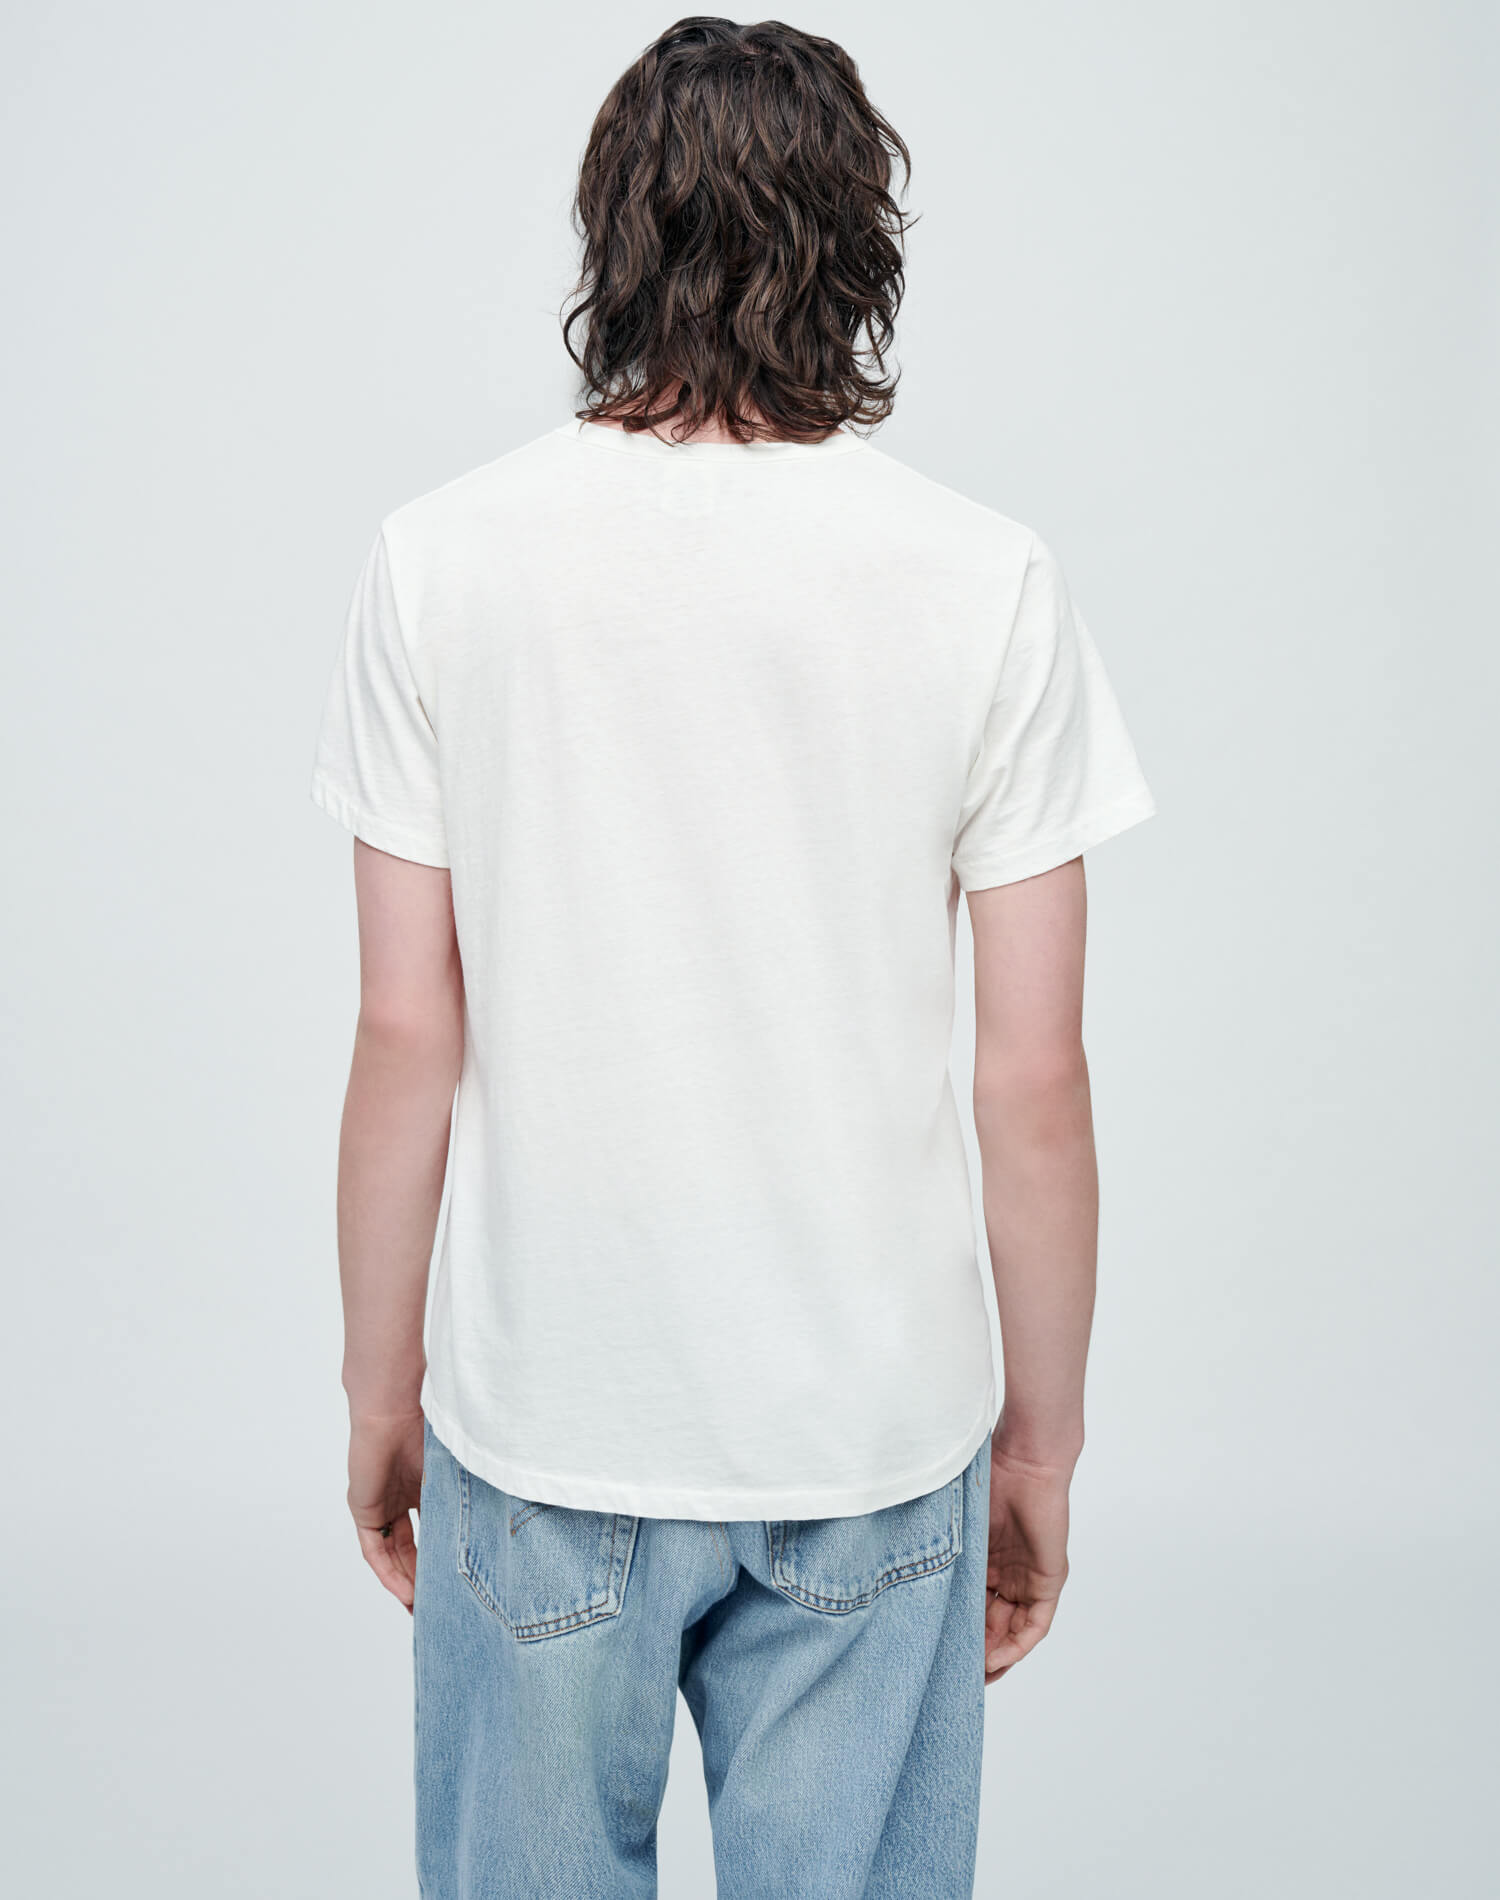 Hanes Classic Tee - Old White